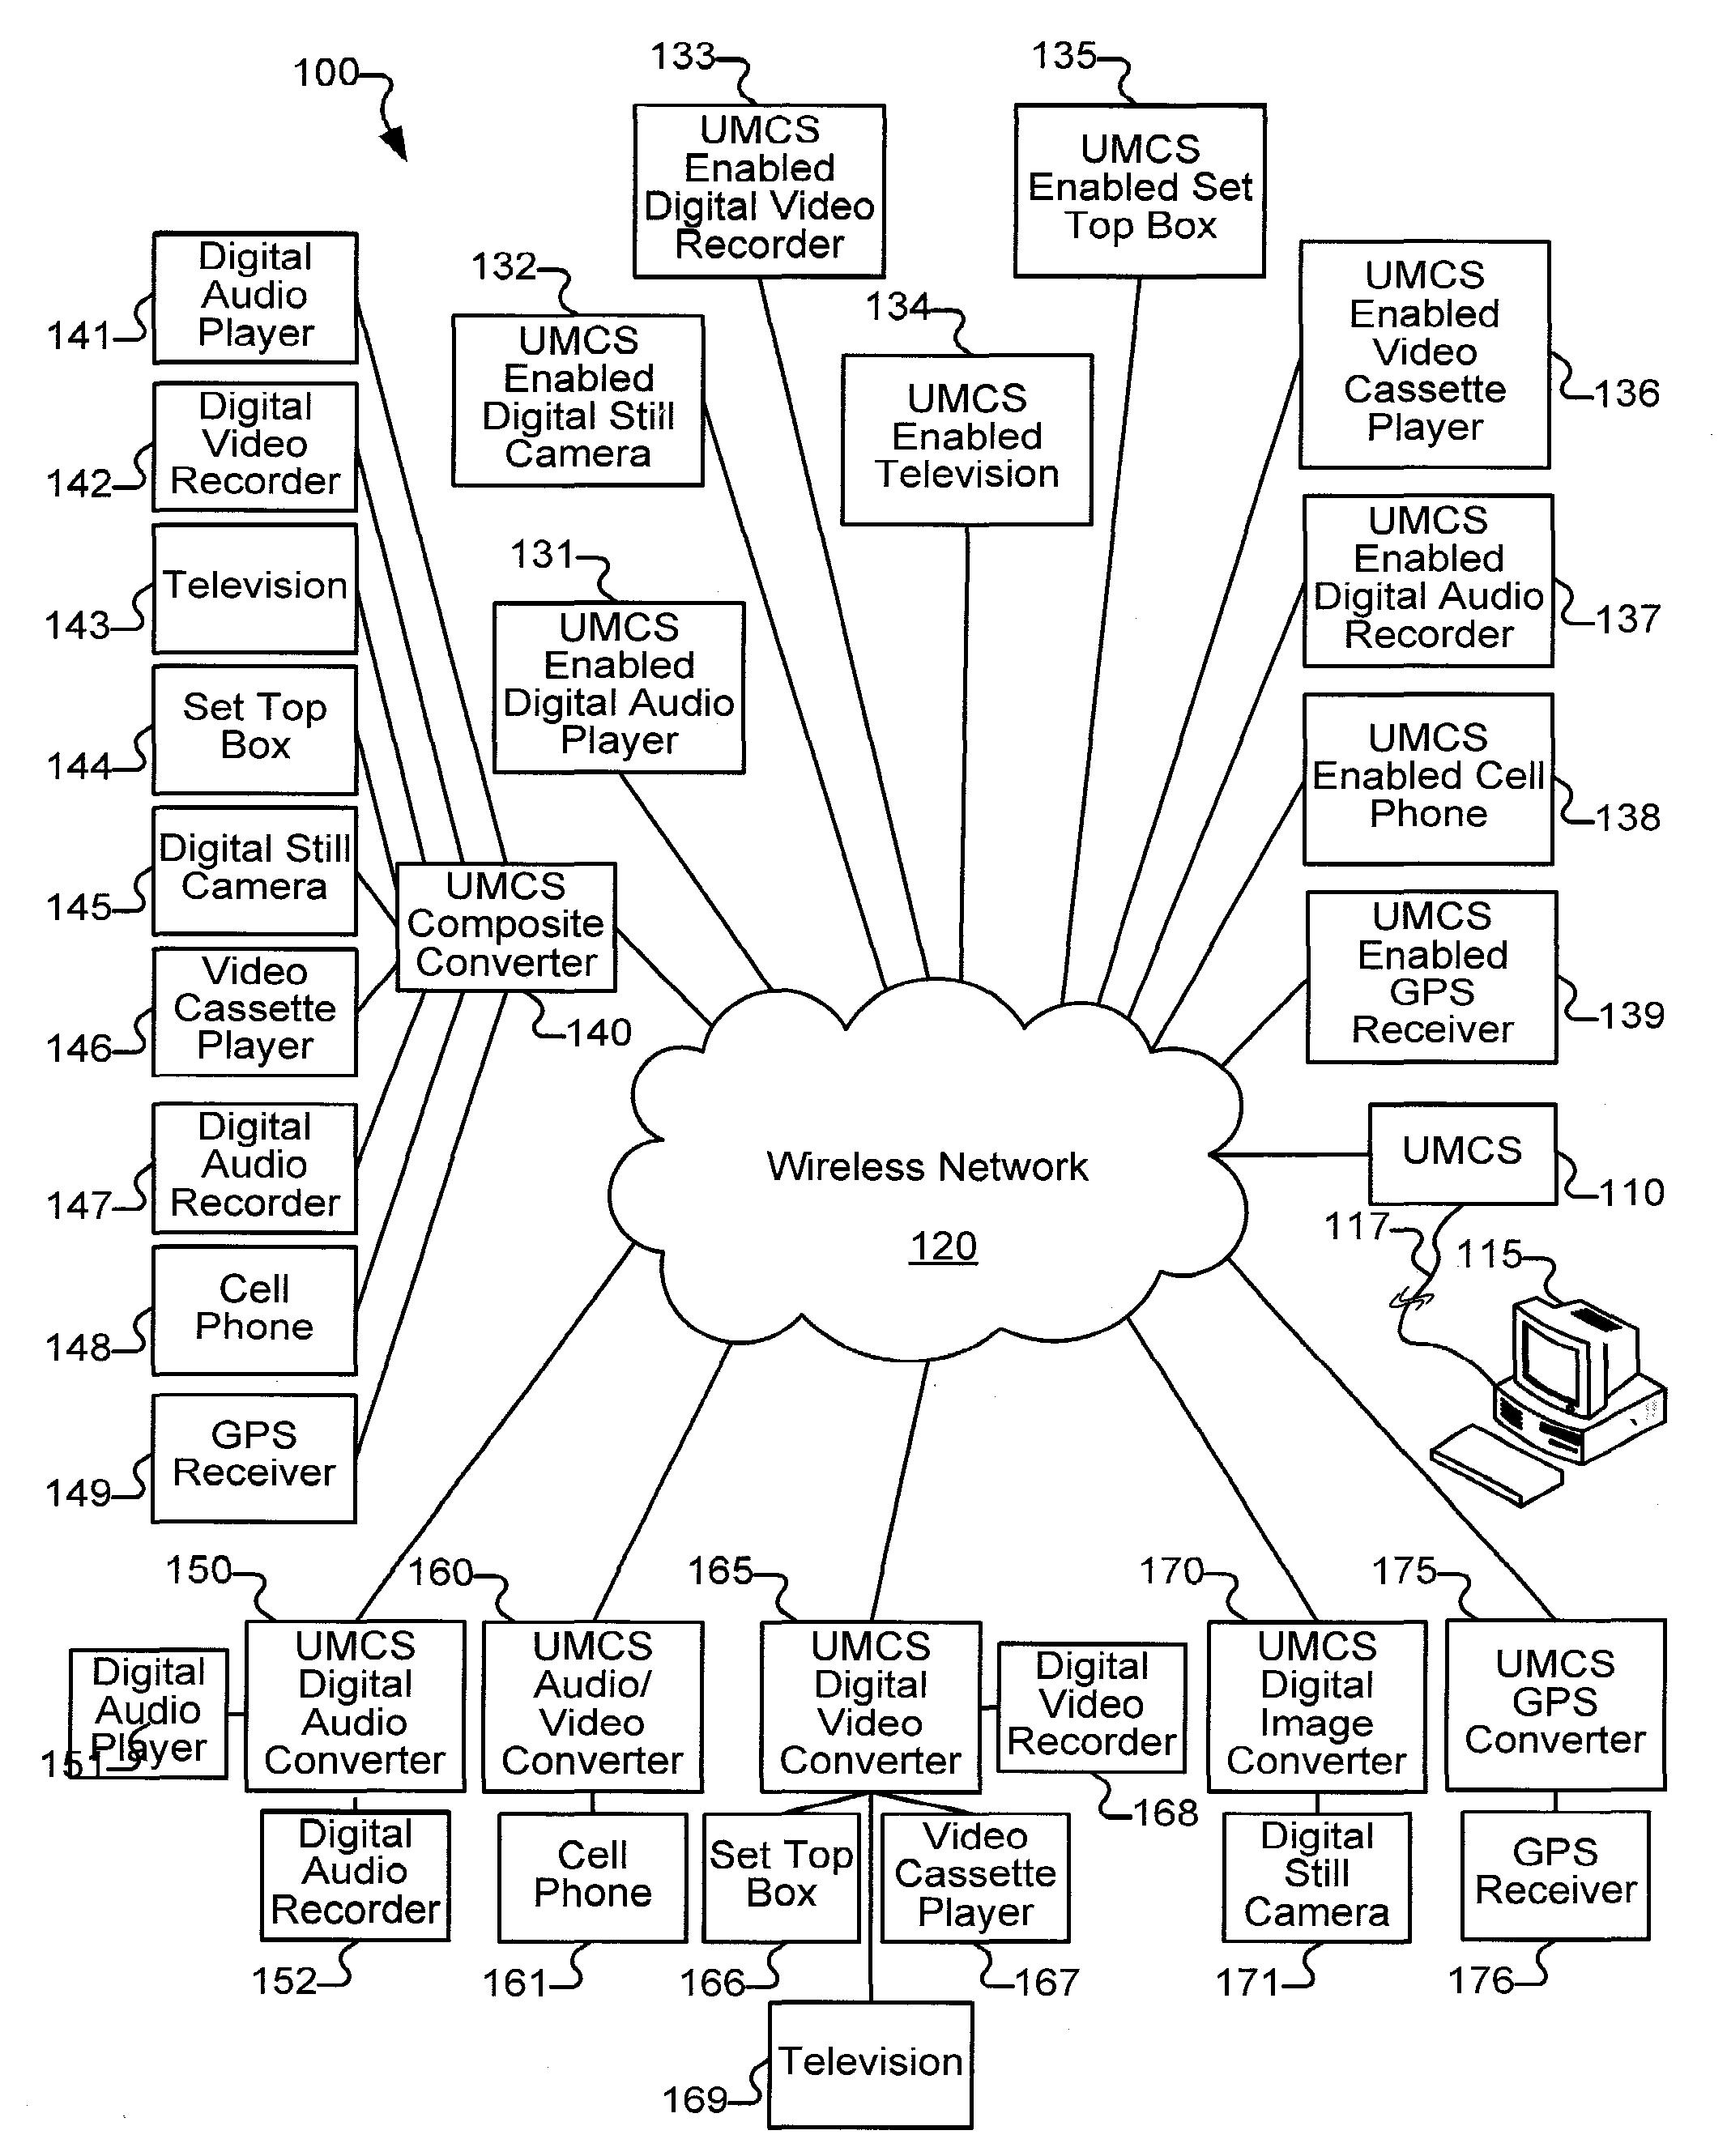 Systems and methods for multiport communication distribution